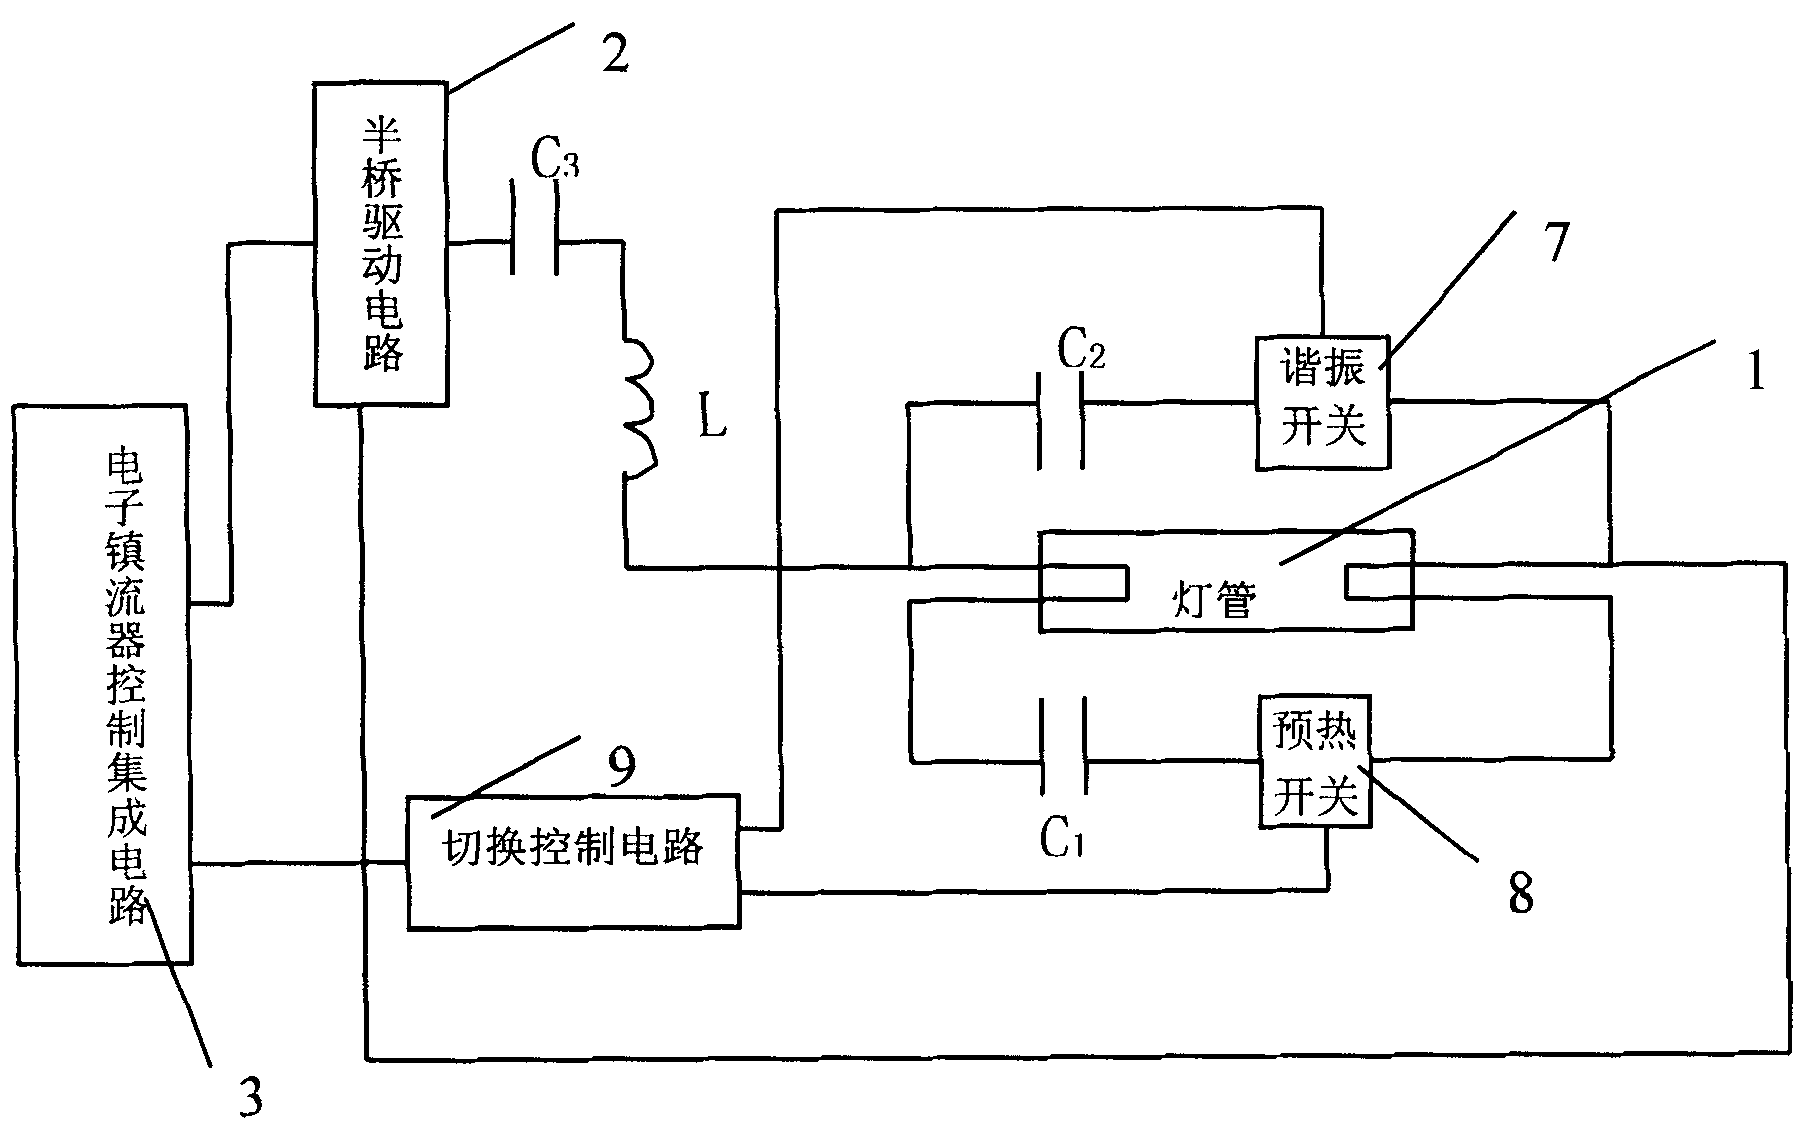 Filament control device for hot-cathode electric ballast